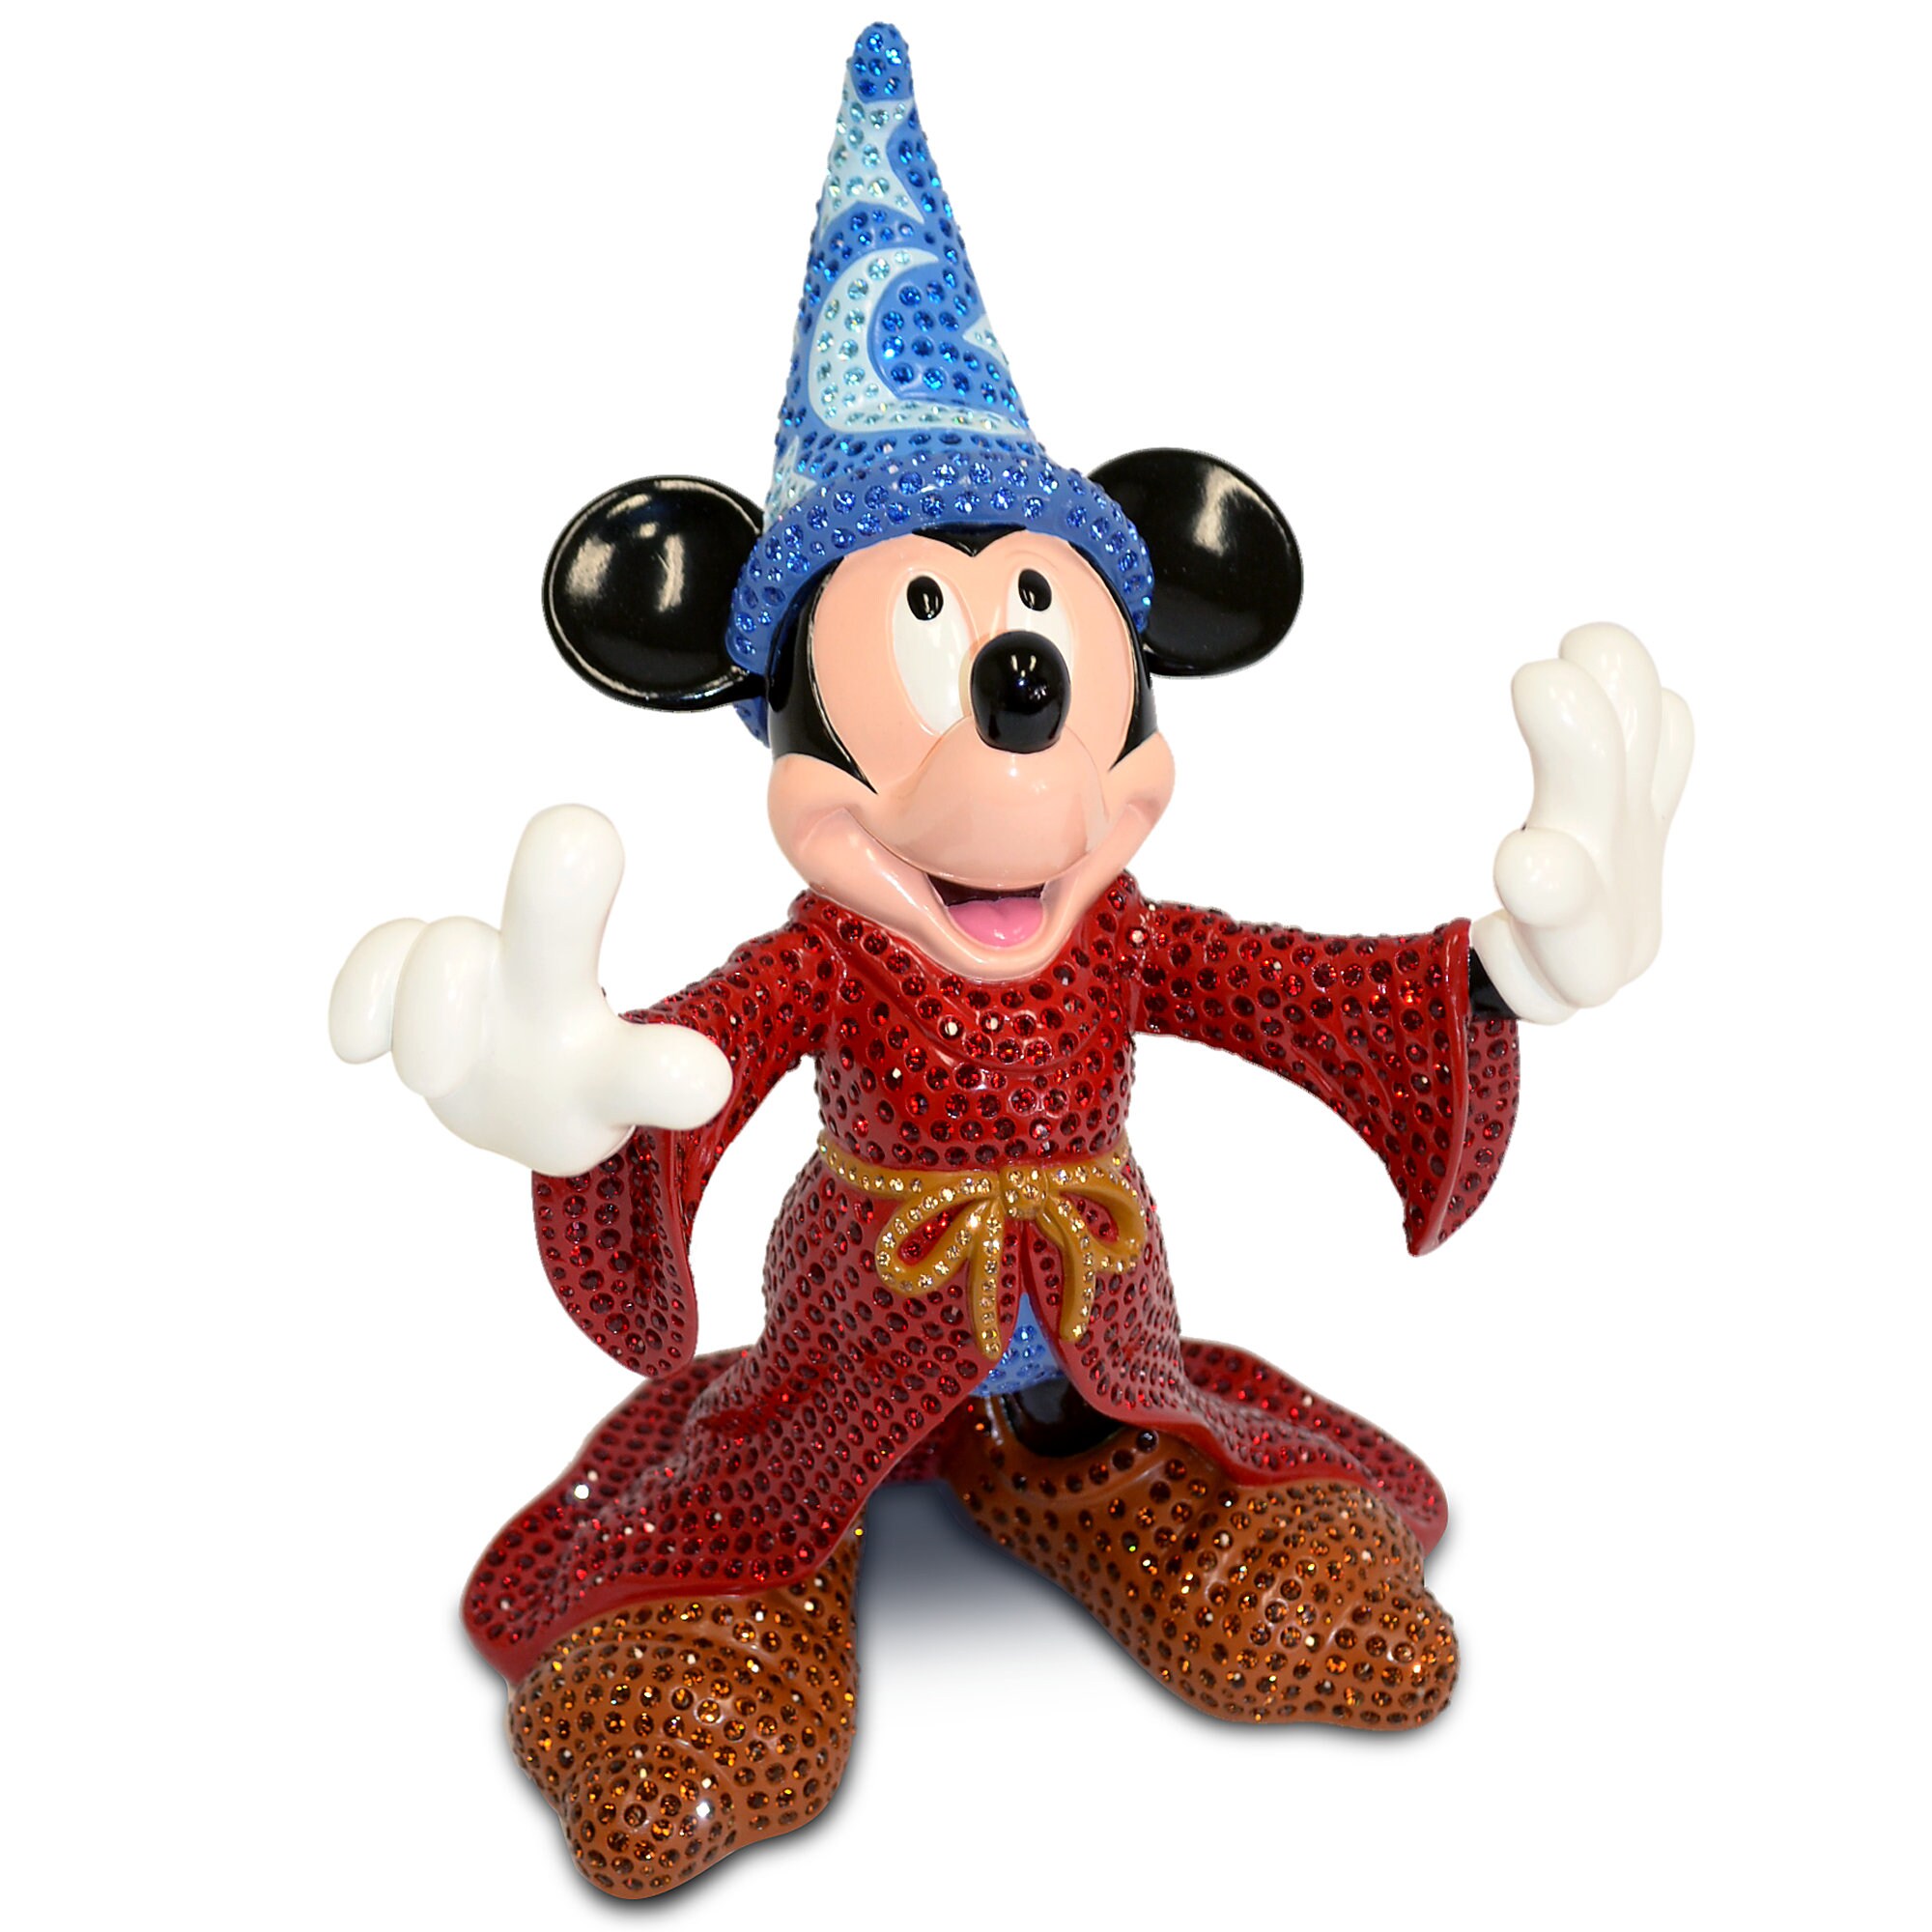 Fantasia Sorcerer Mickey Mouse Figurine by Arribas Brothers